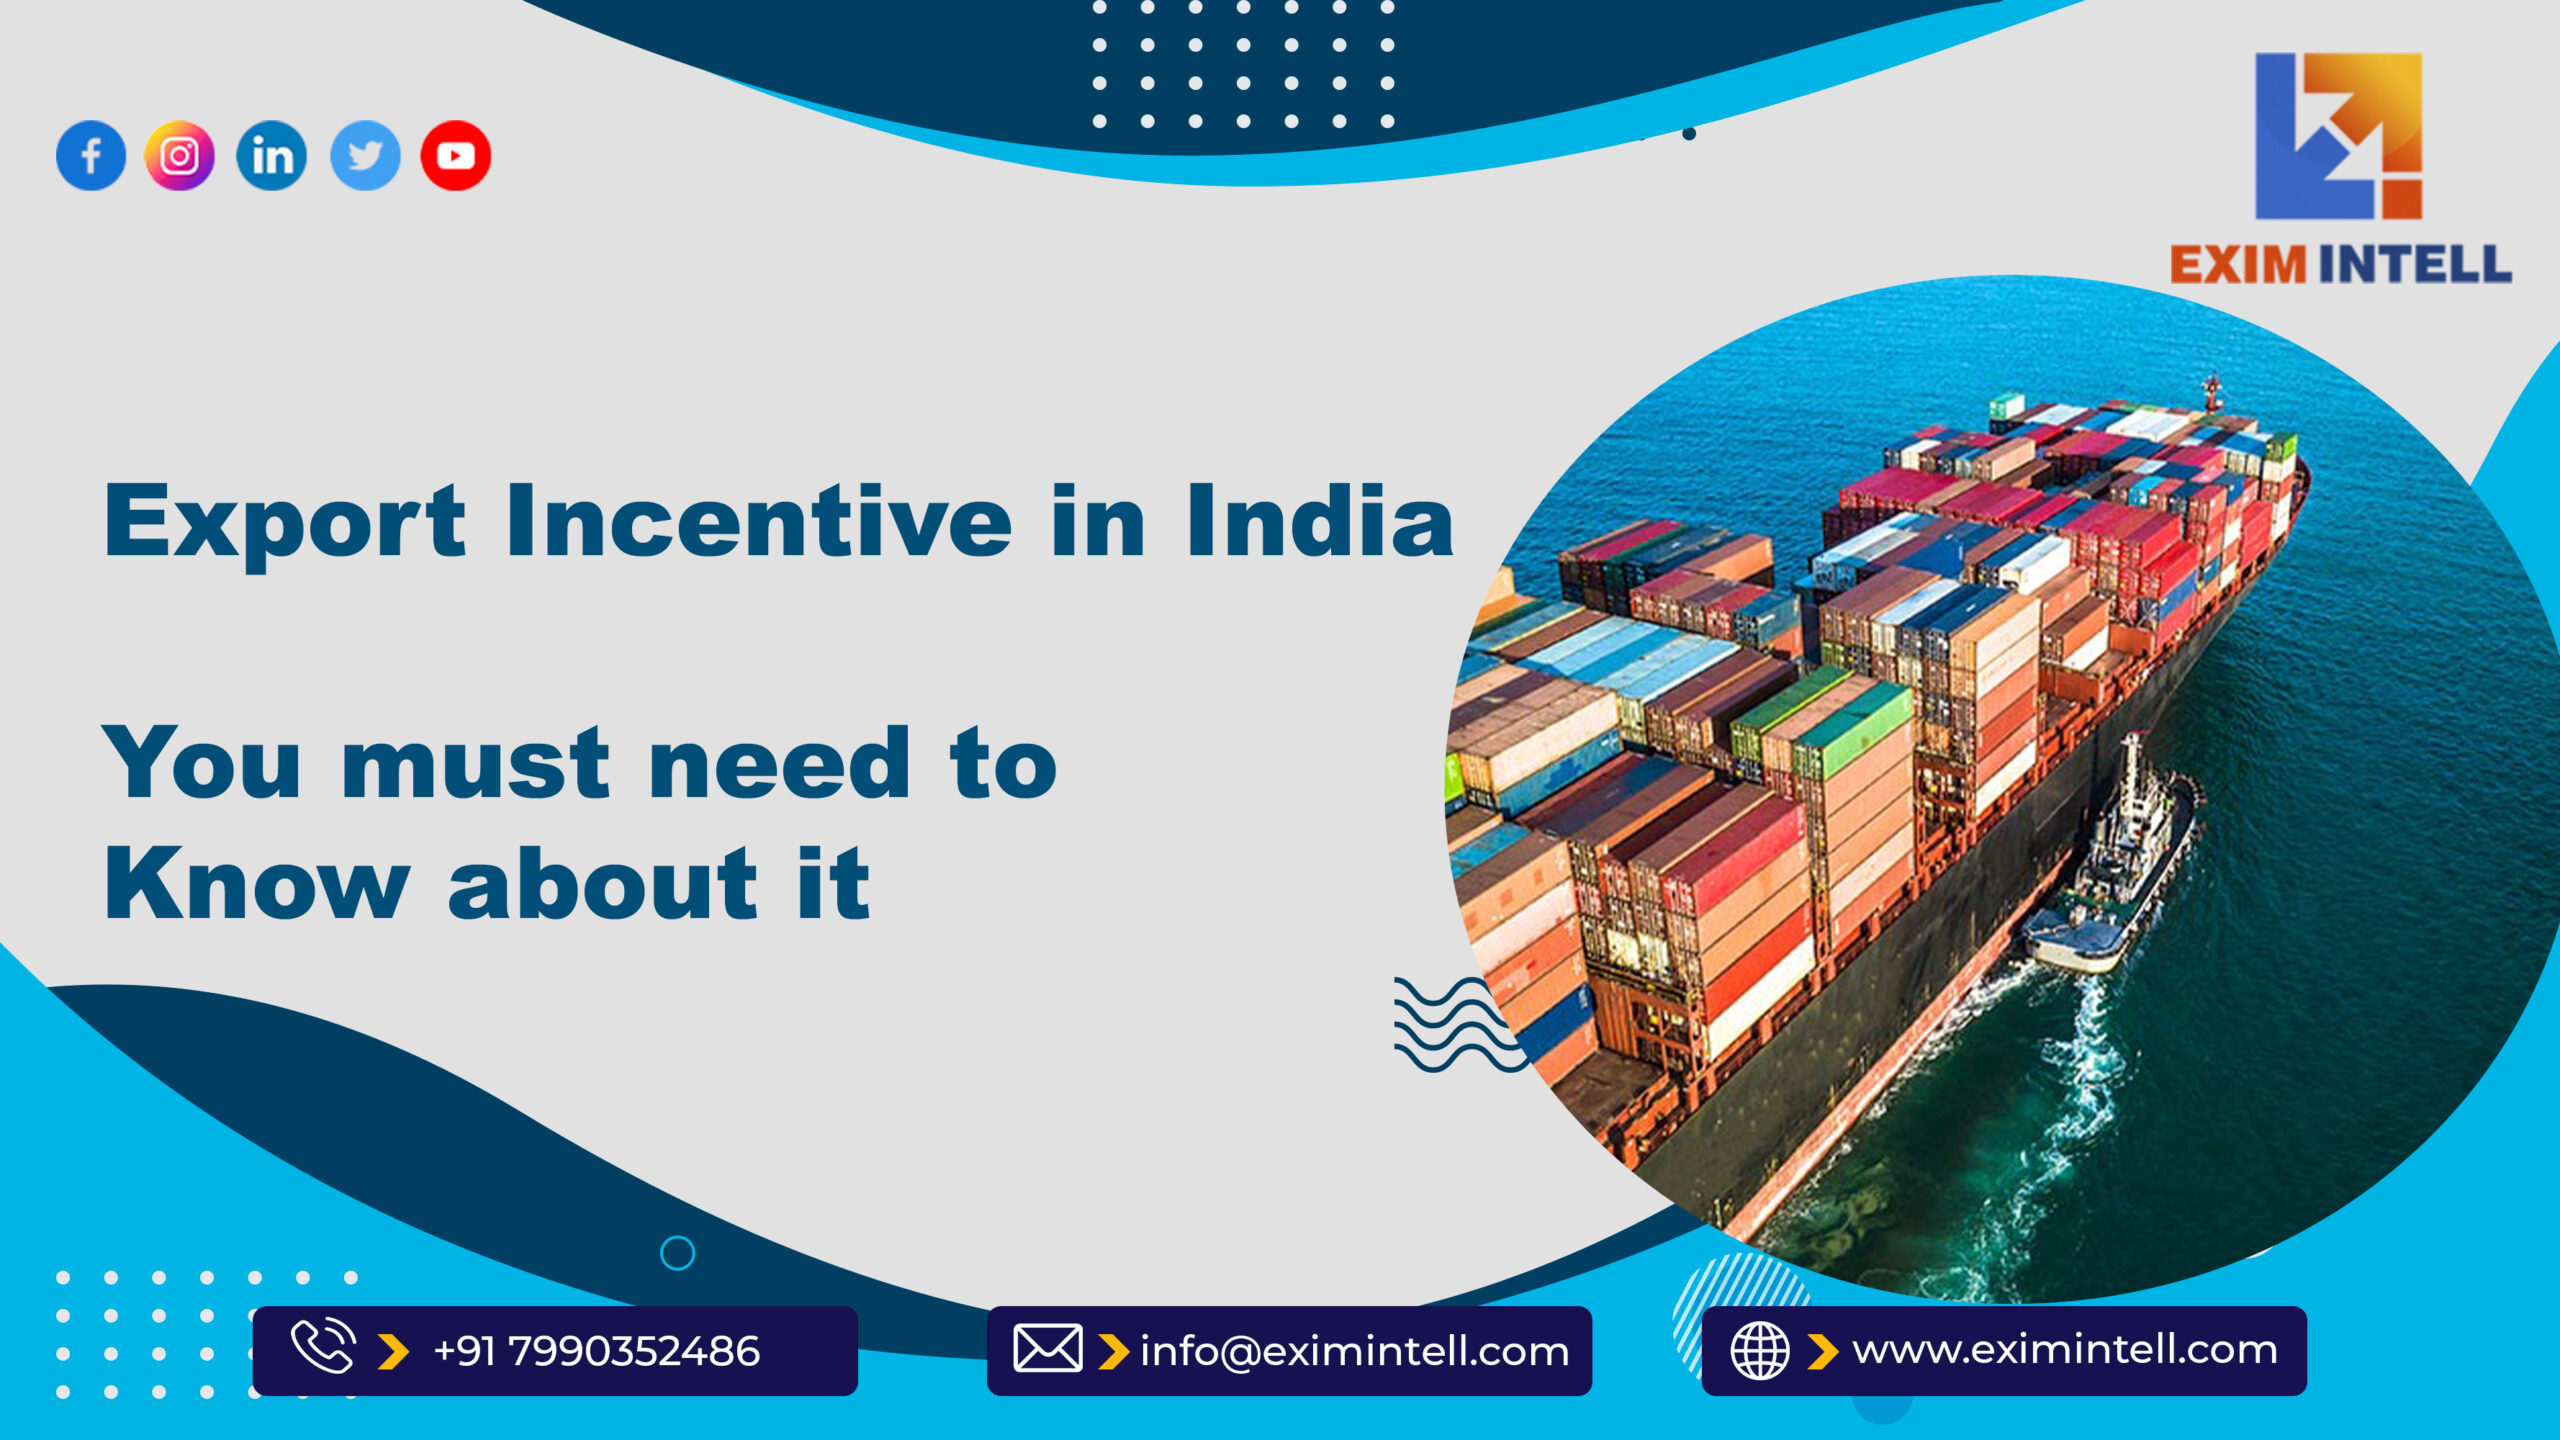 Export Incentive in India- You must need to Know about it